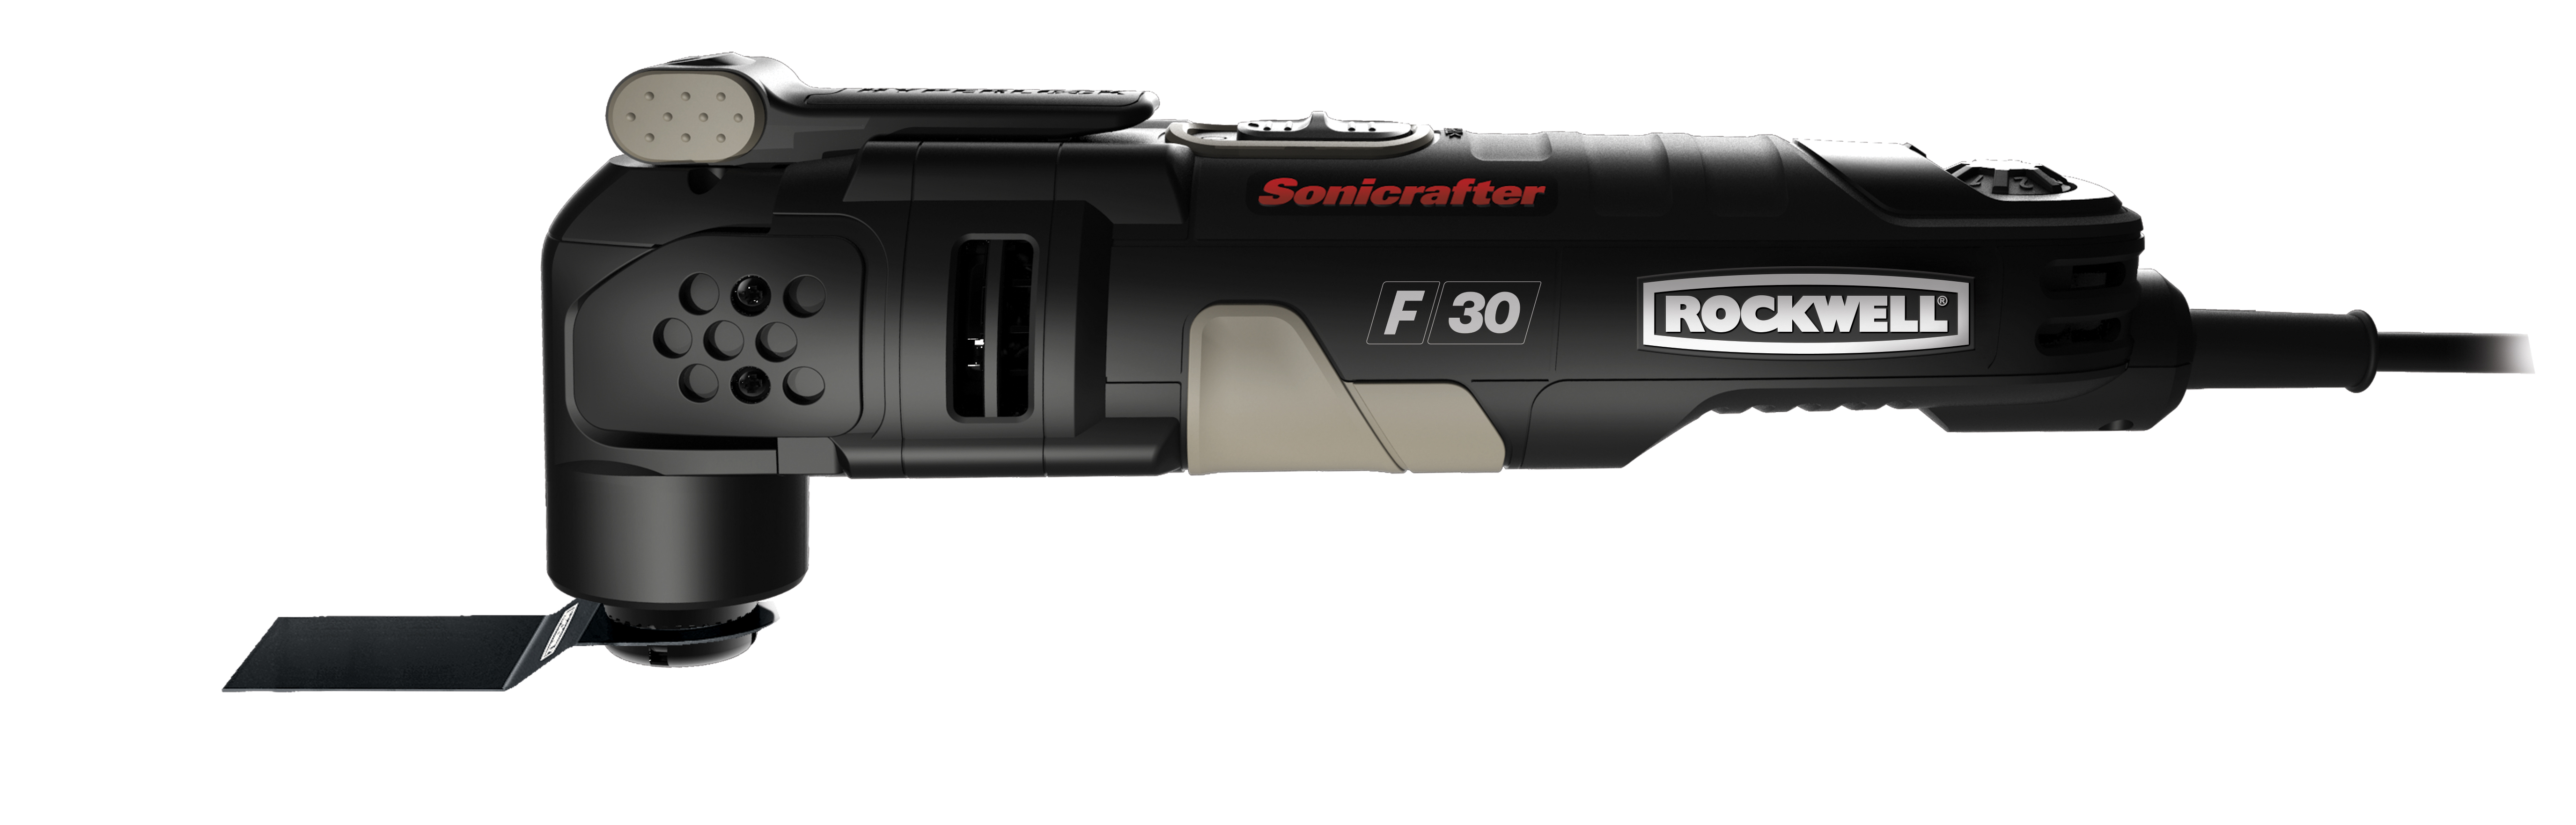 Rockwell Sonicrafter F30